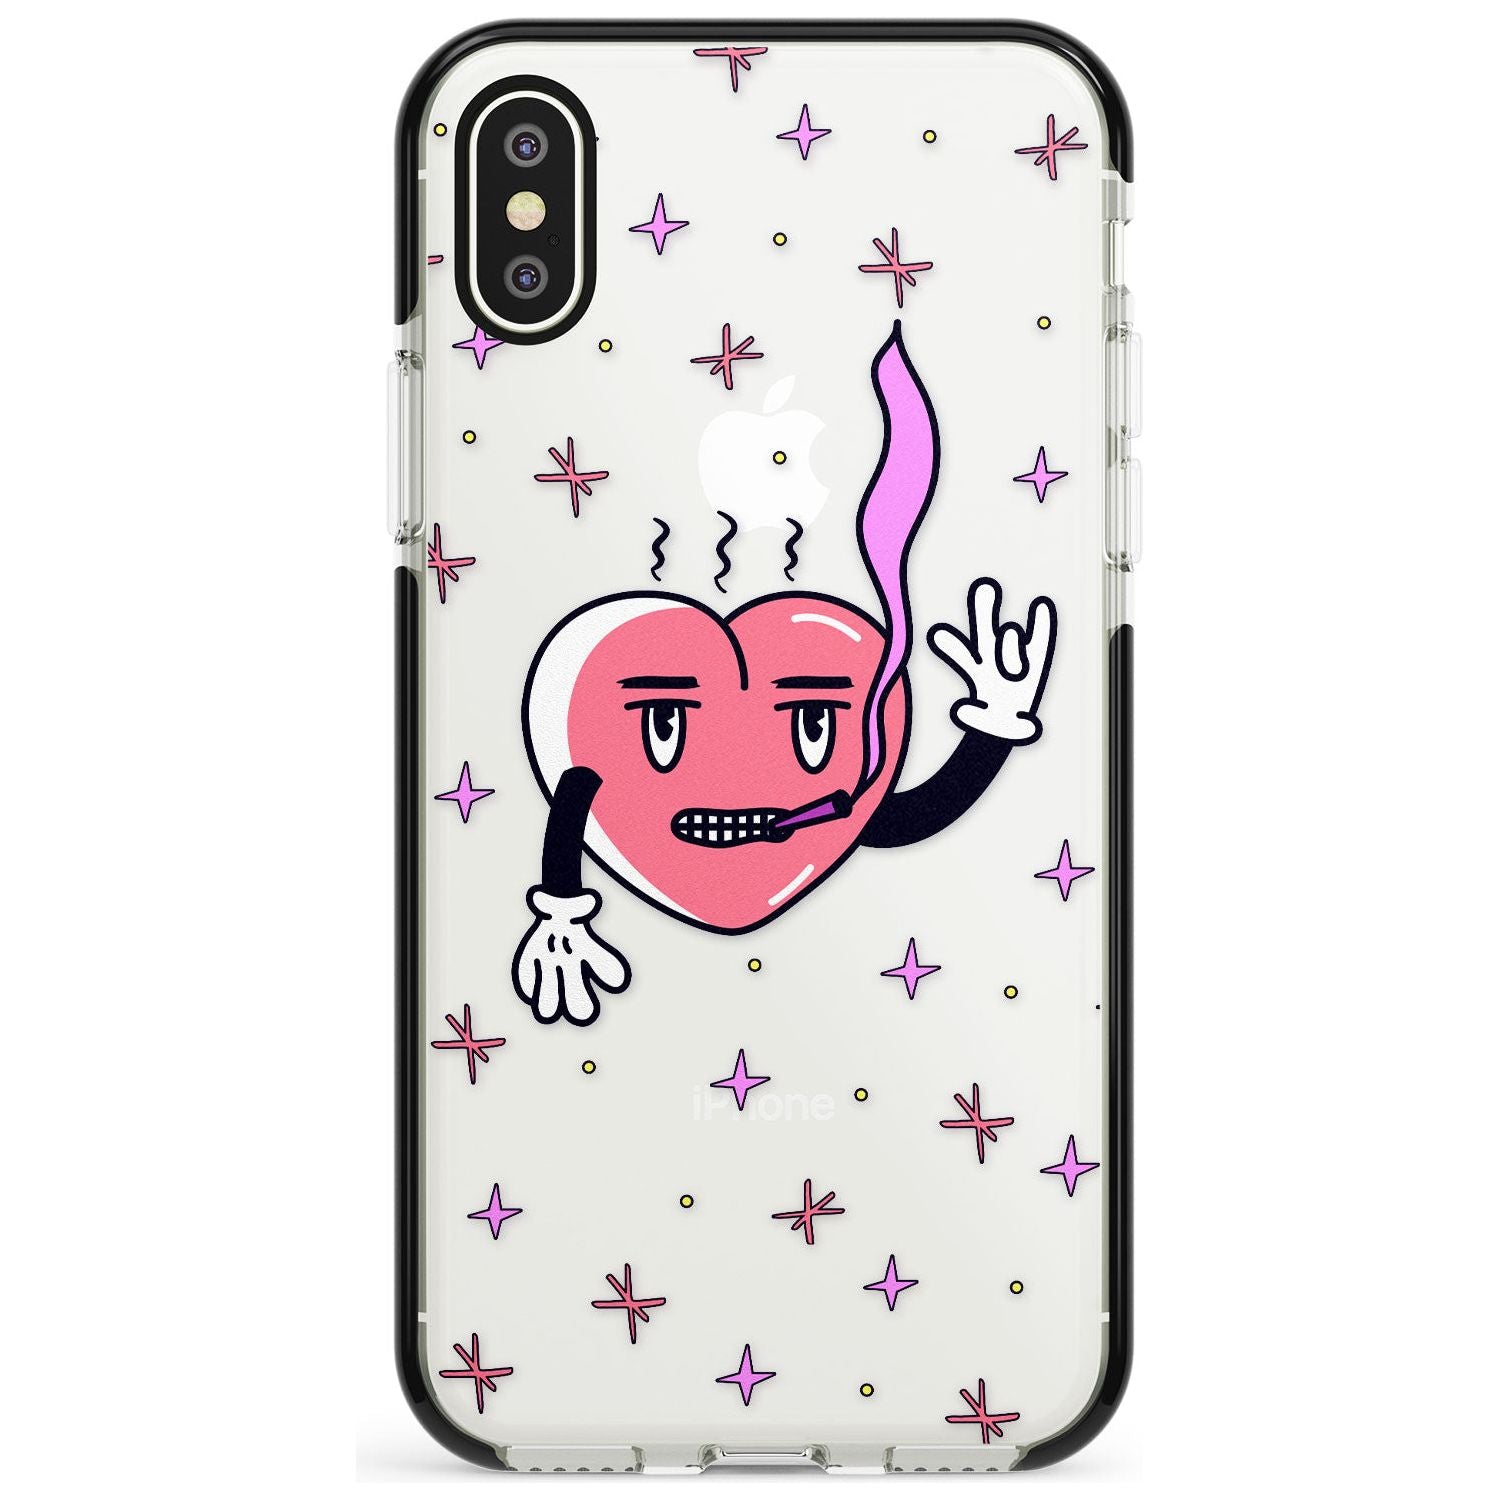 Rock n Roll Heart (Clear) Black Impact Phone Case for iPhone X XS Max XR